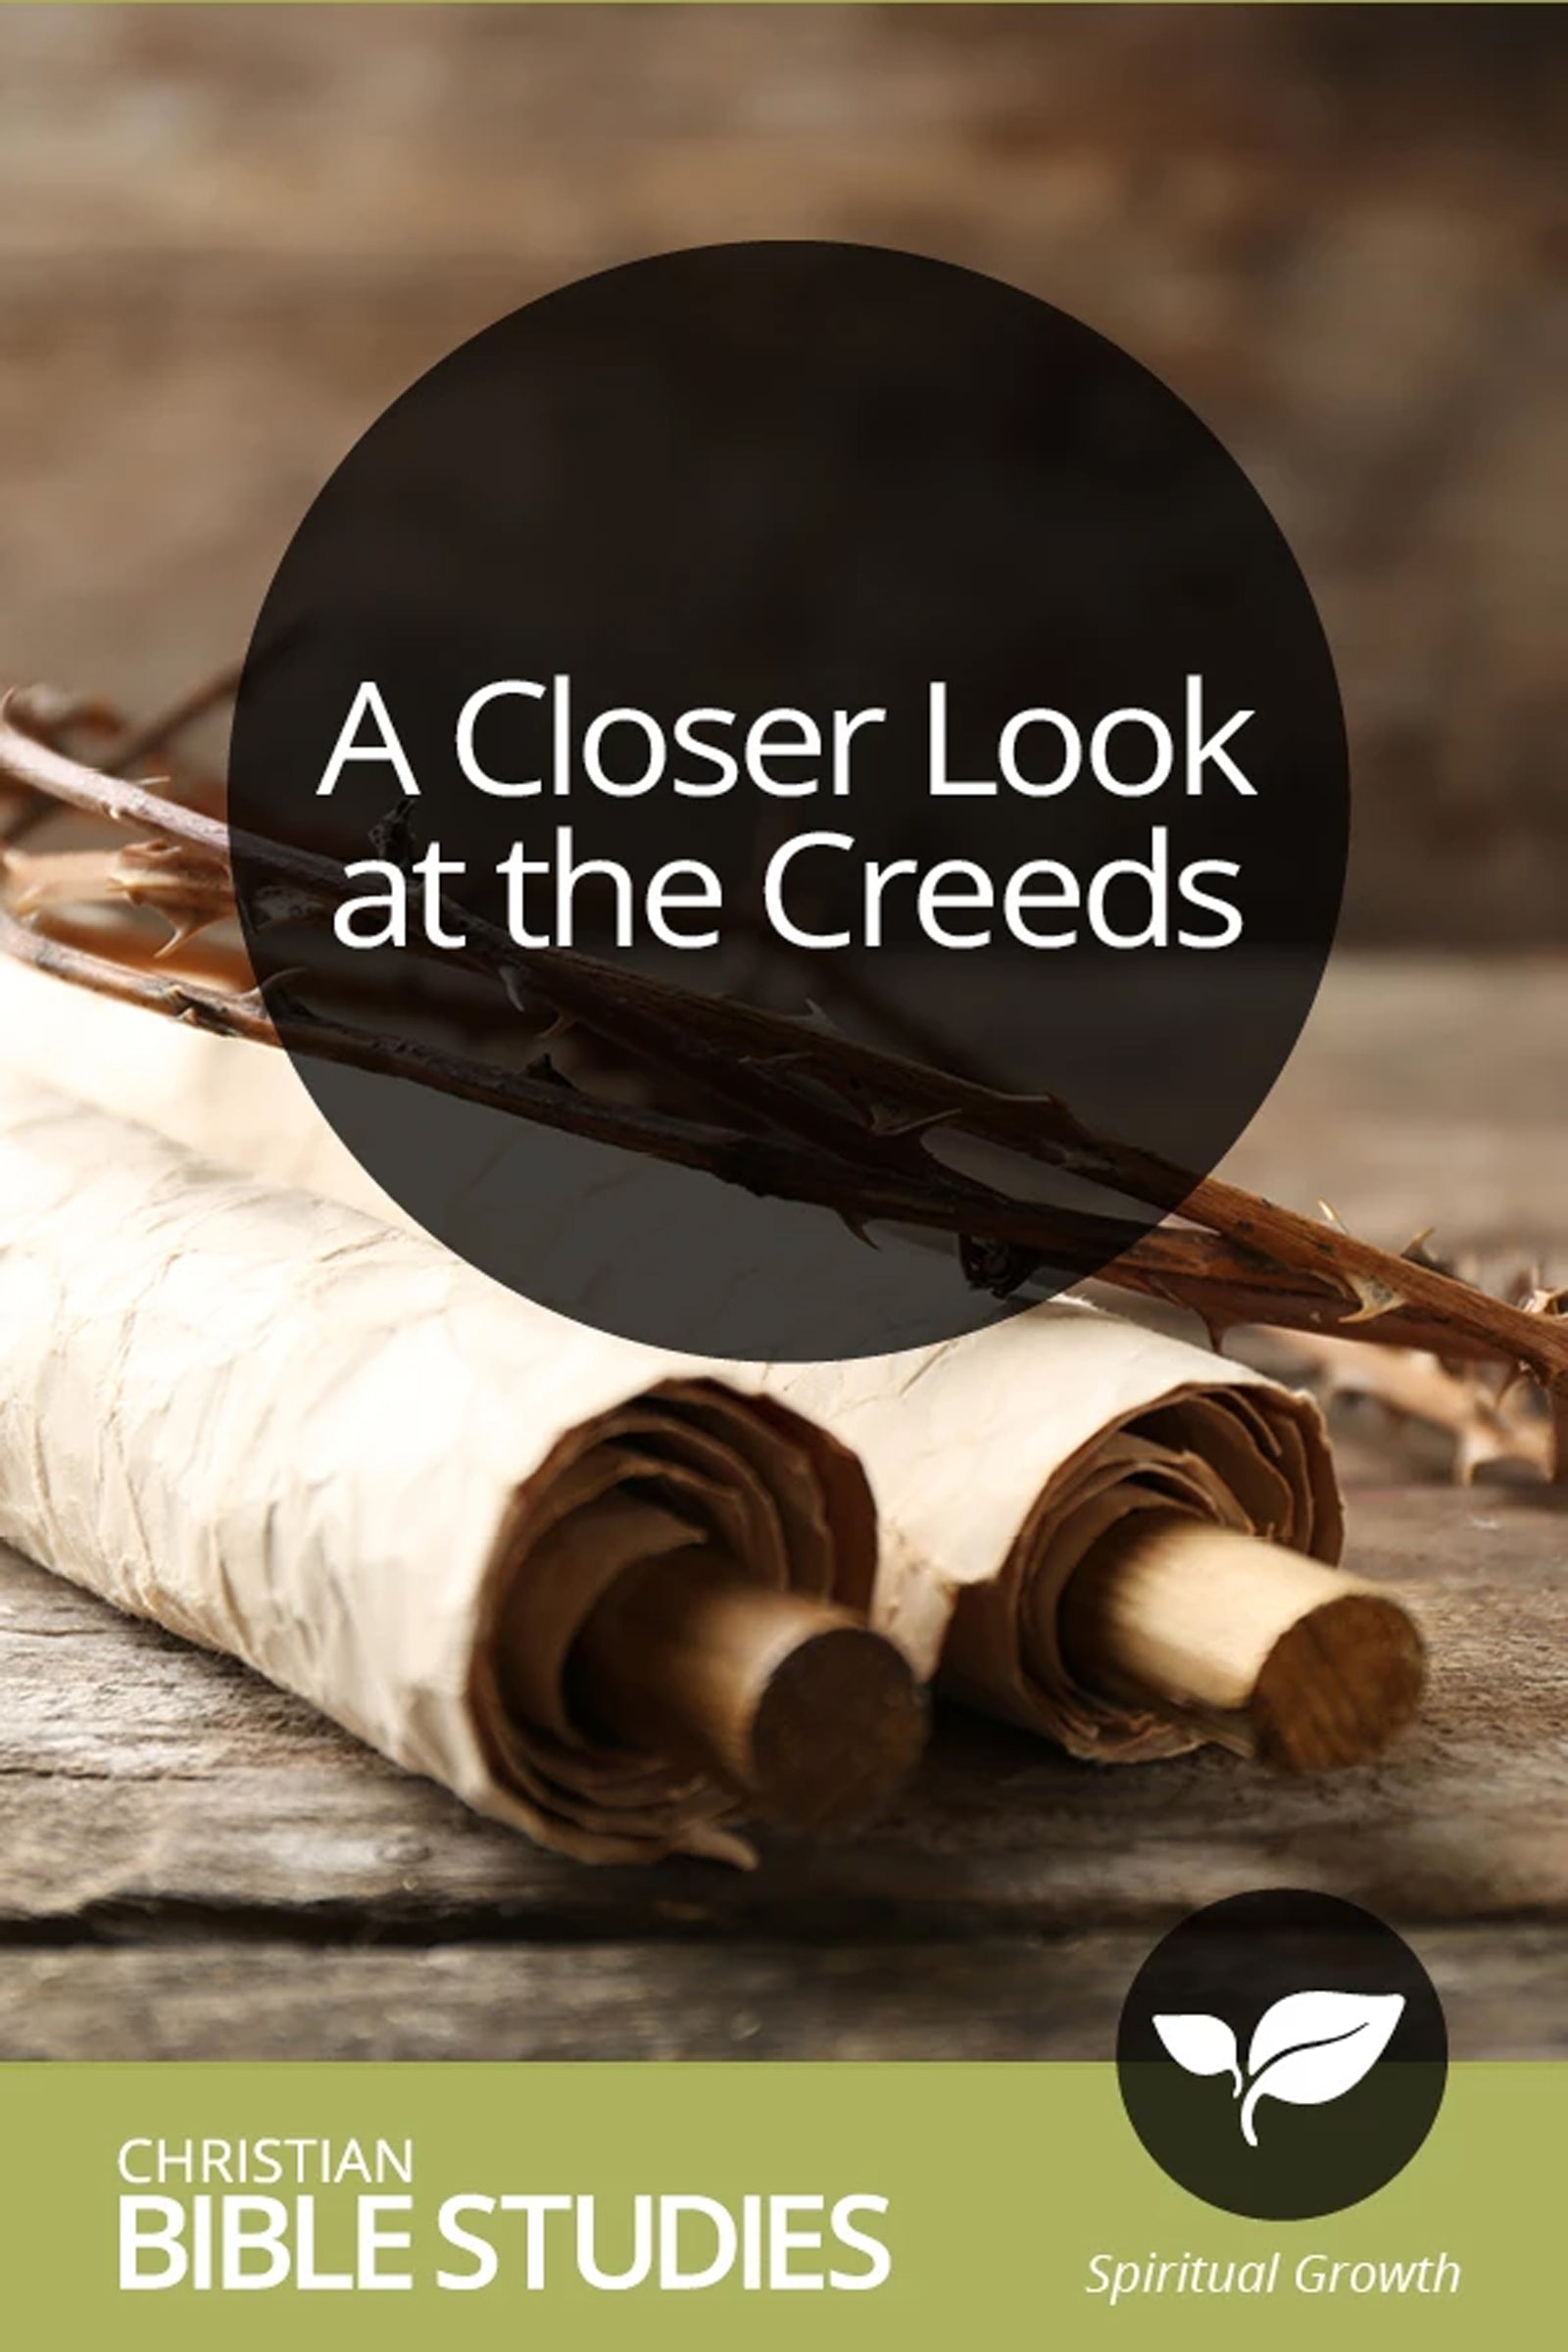 A Closer Look at the Creeds